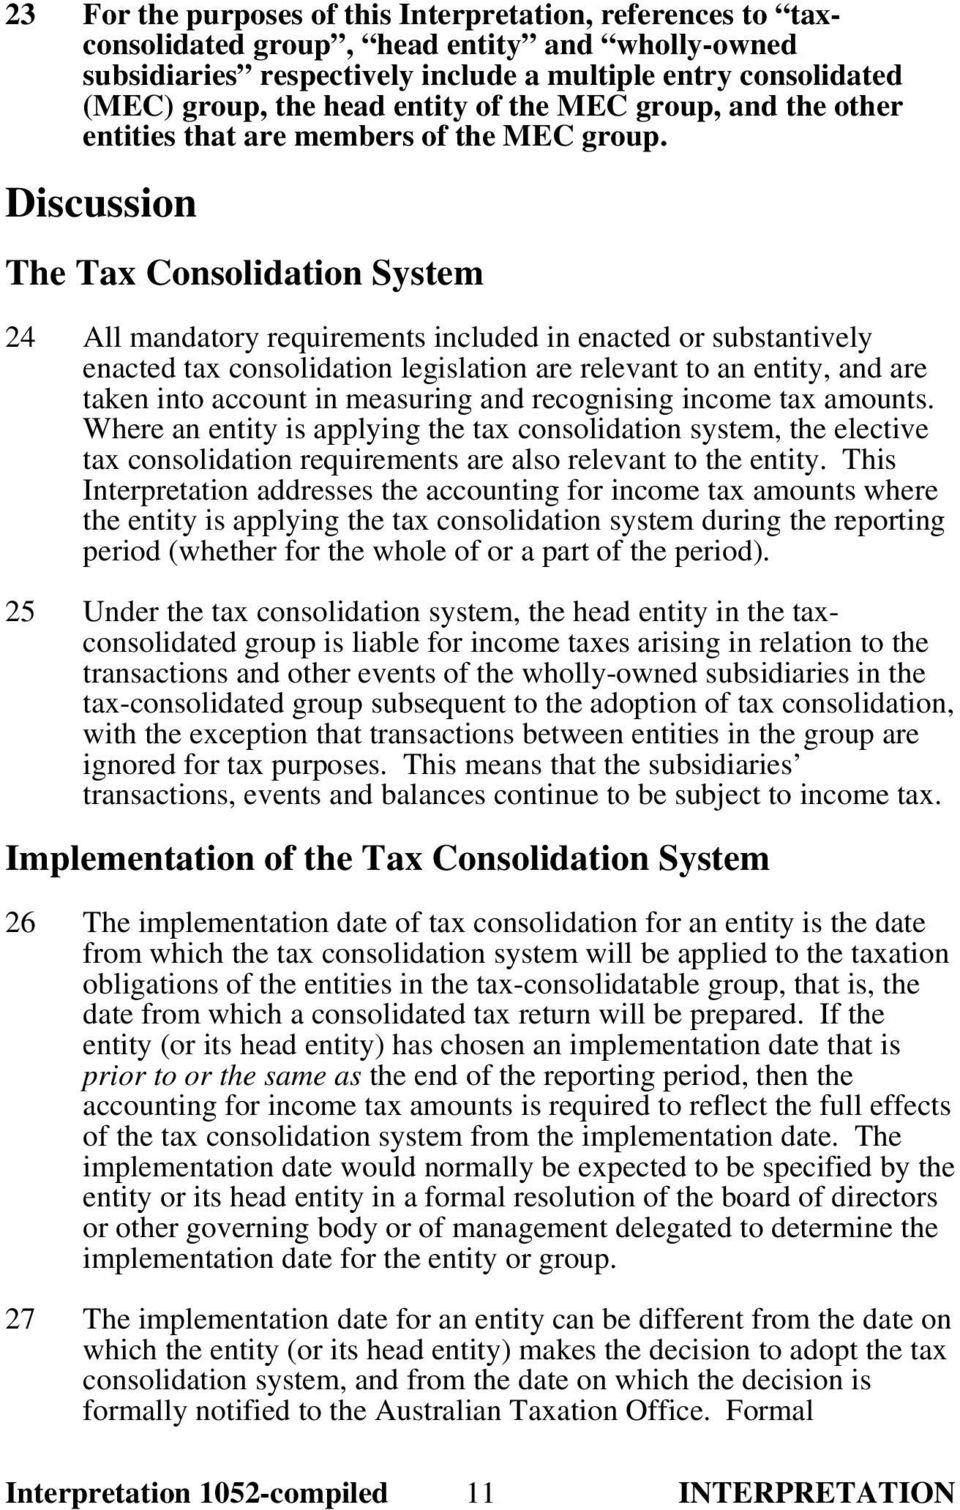 Discussion The Tax Consolidation System 24 All mandatory requirements included in enacted or substantively enacted tax consolidation legislation are relevant to an entity, and are taken into account